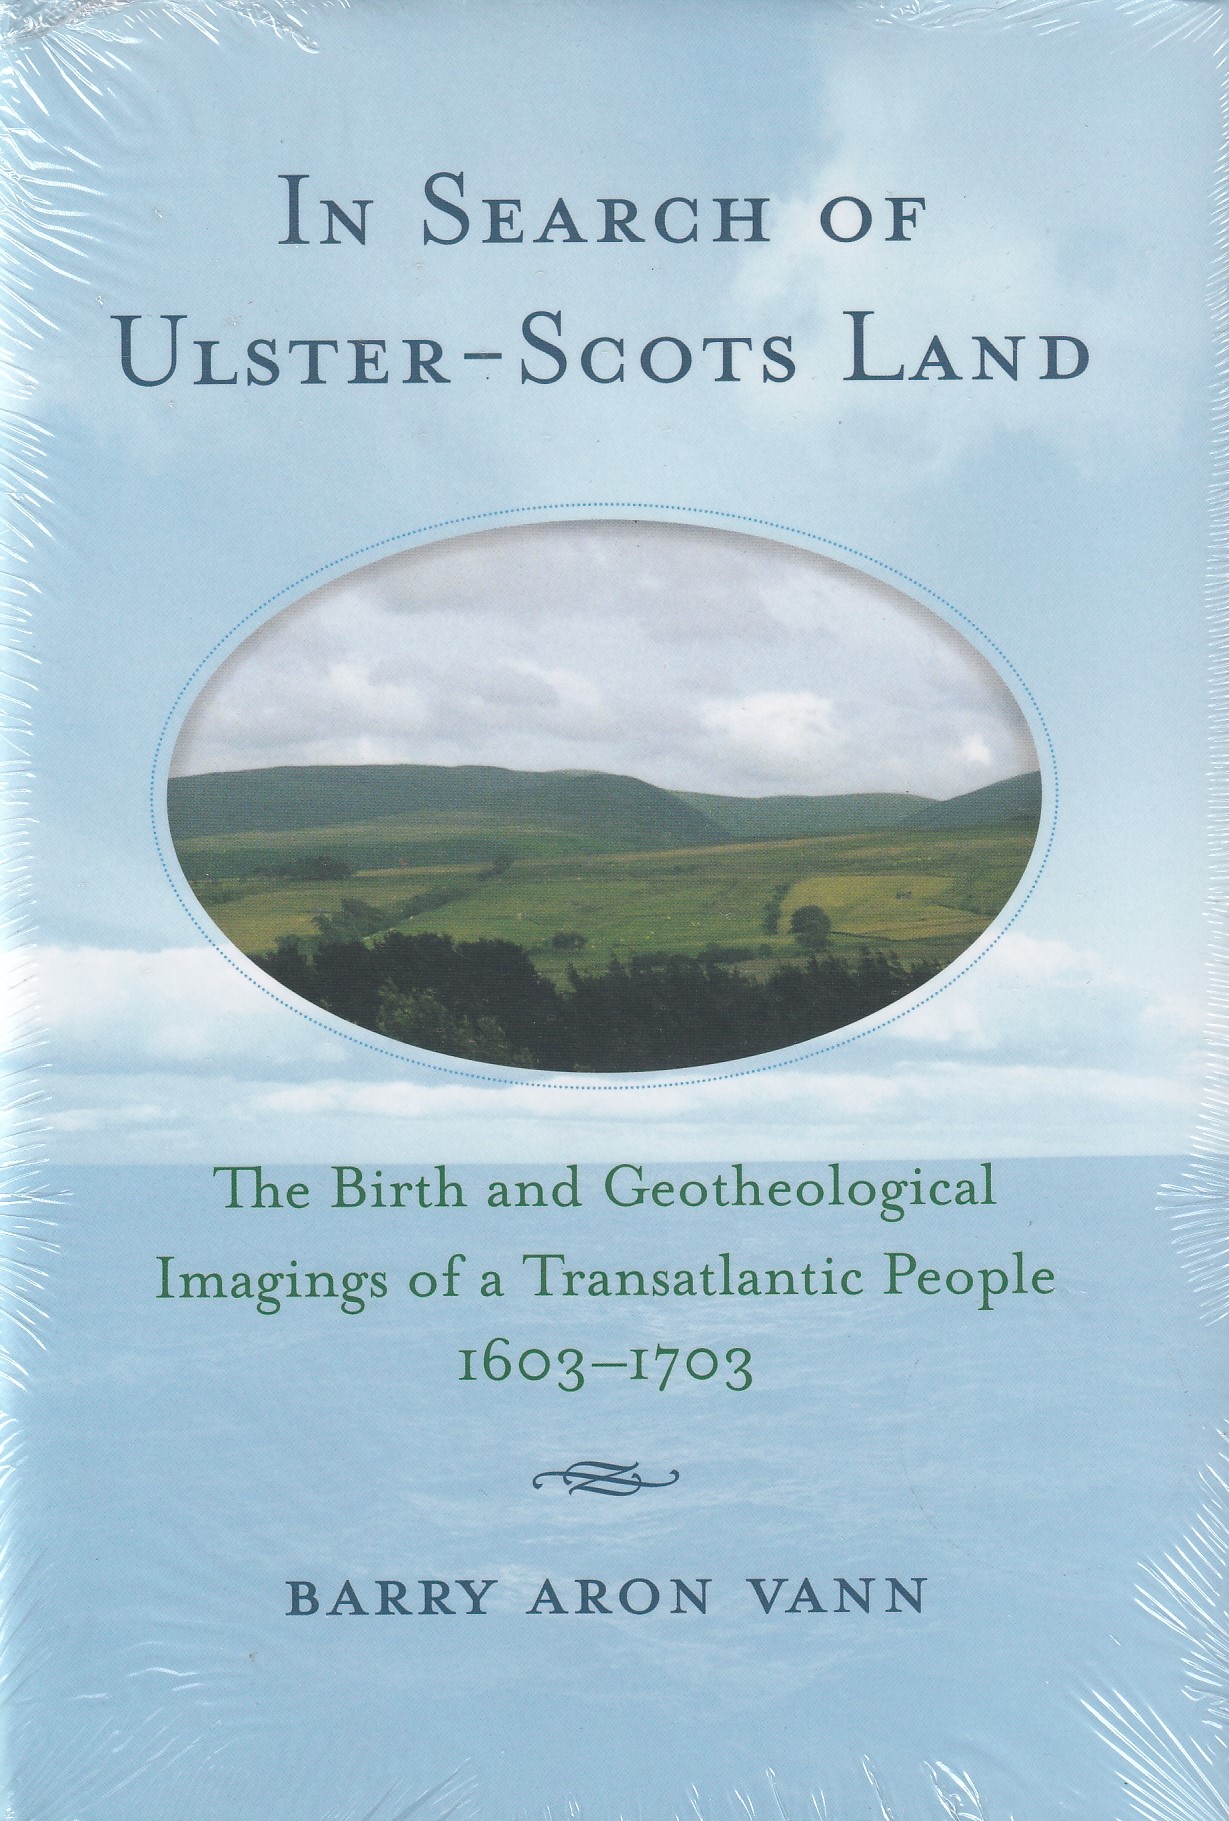 In Search of Ulster-Scots Land: The Birth and Geotheological Imagings of a Transatlantic People, 1603-1703 | Barry Aron Vann | Charlie Byrne's